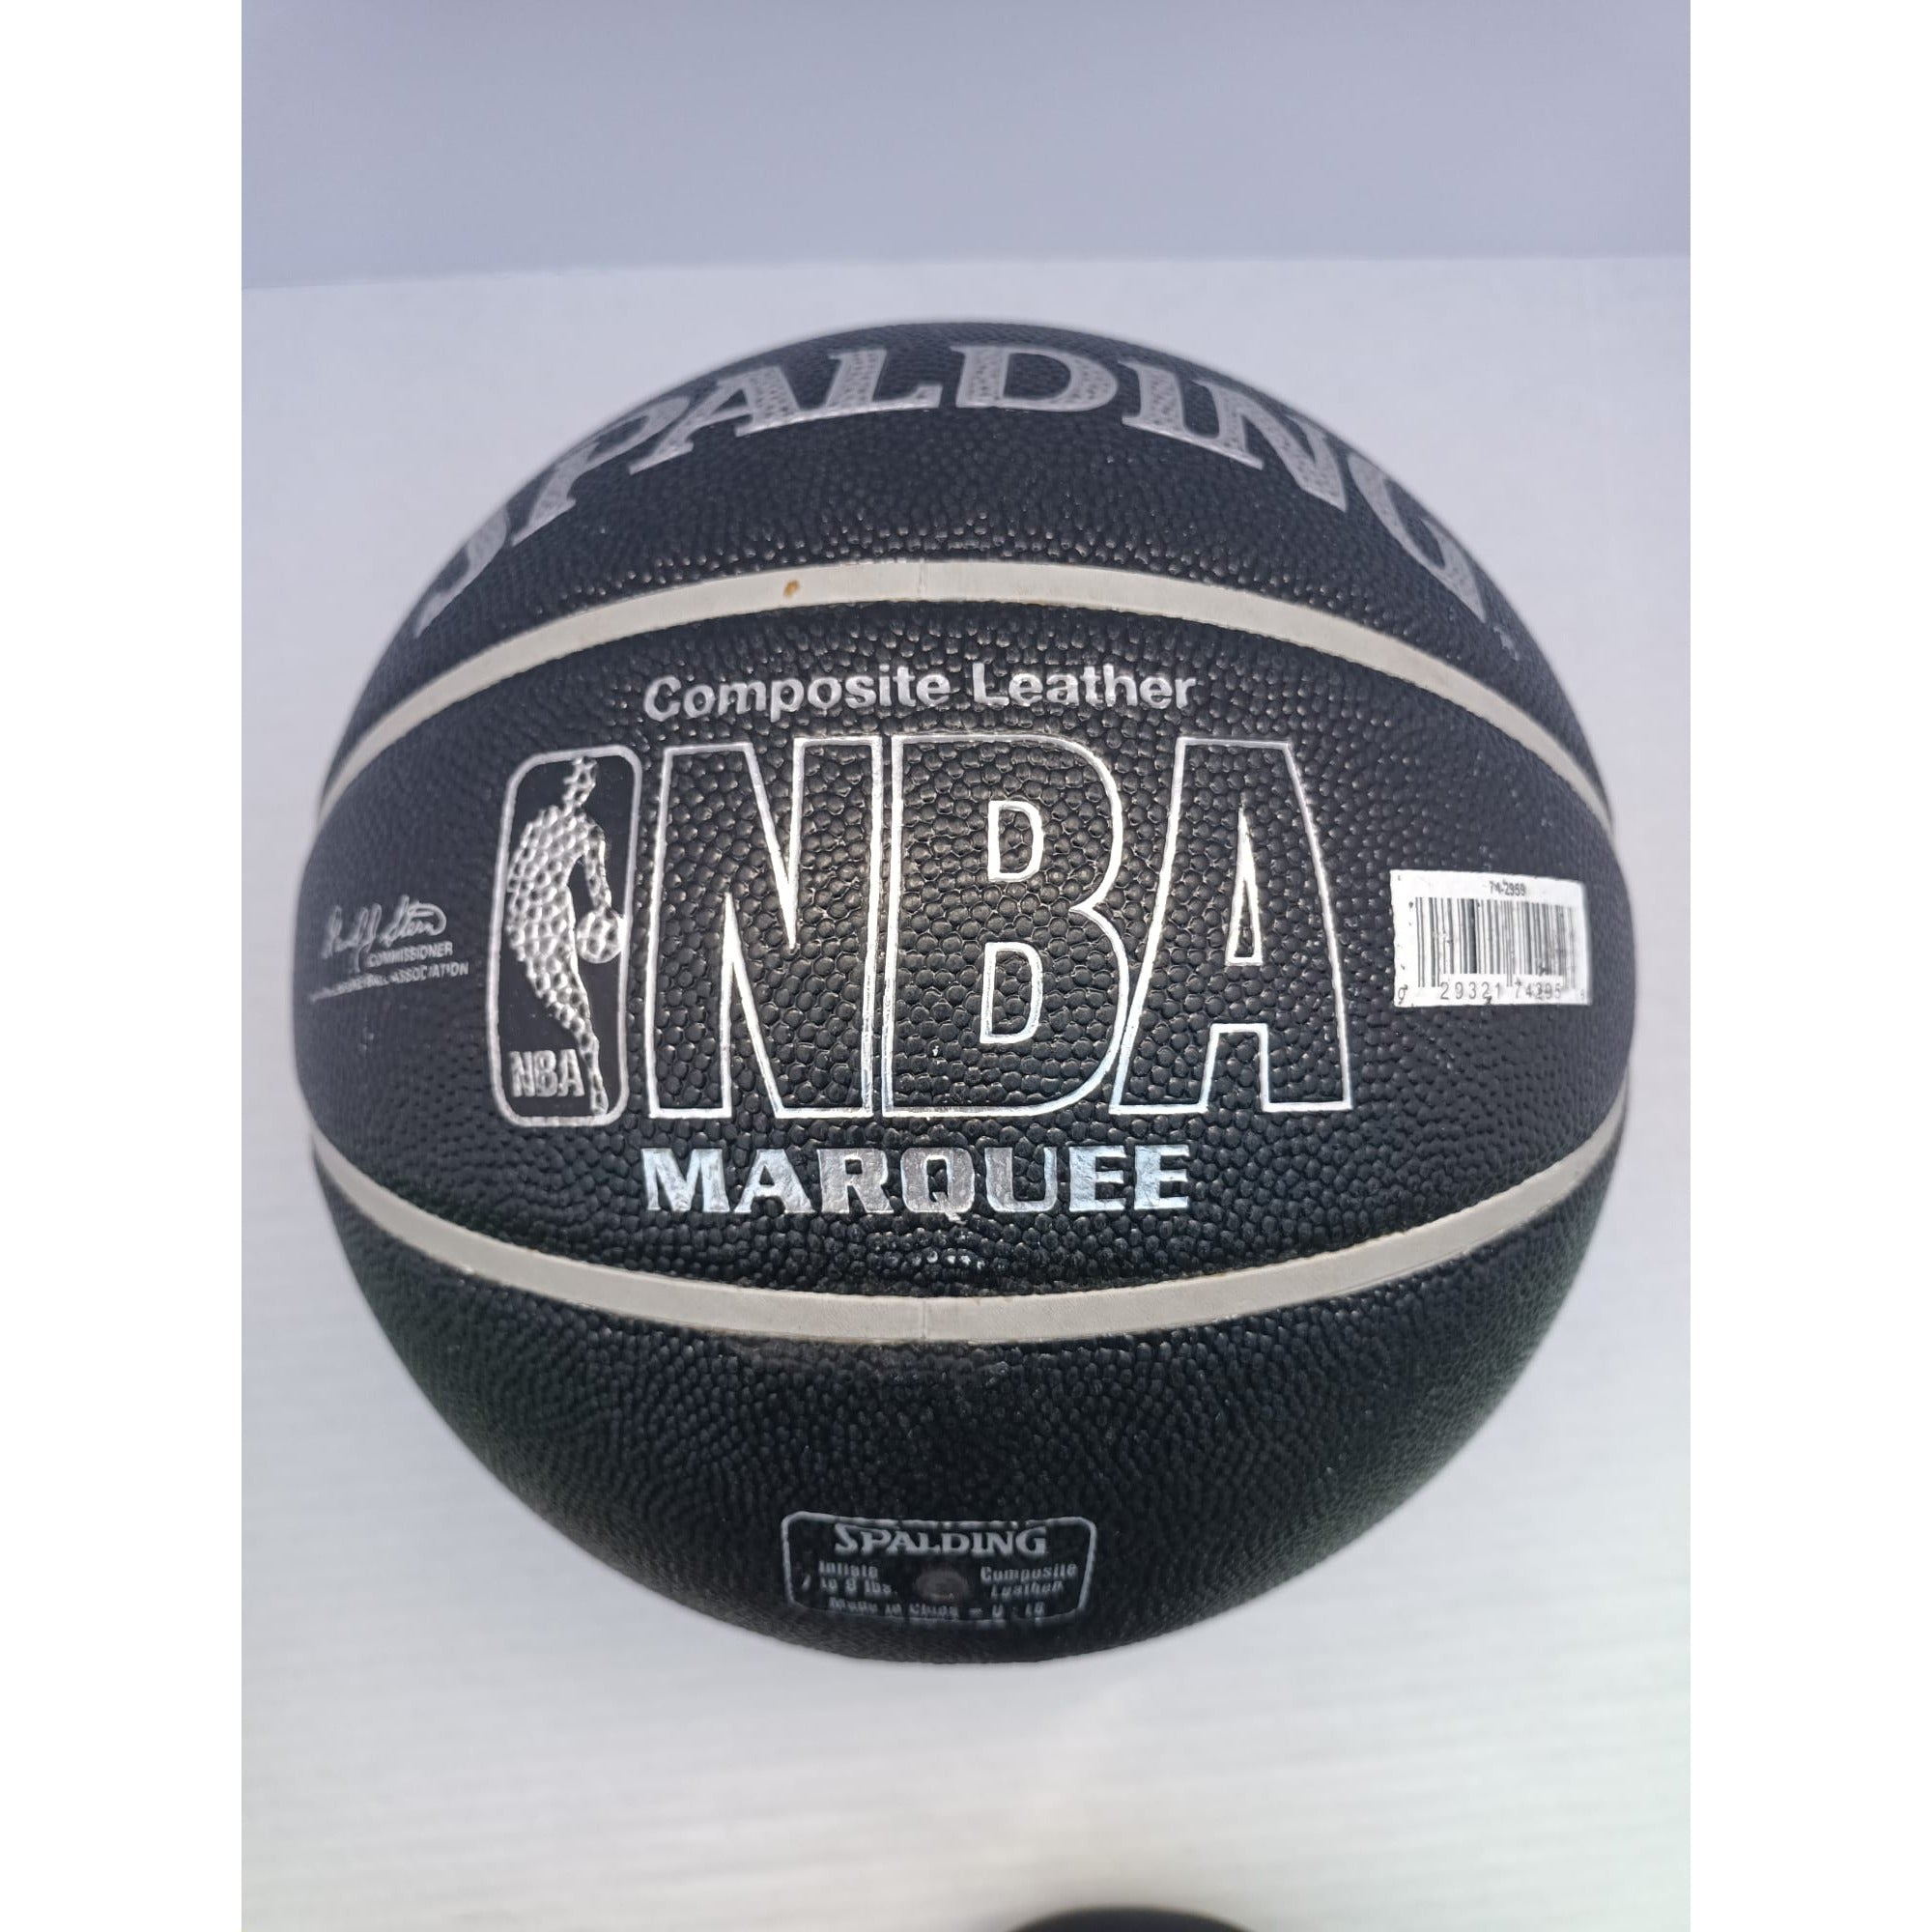 Kobe Bryant Los Angeles Lakers signed and inscribed "Black Mamba"  Spalding basketball signed with proof